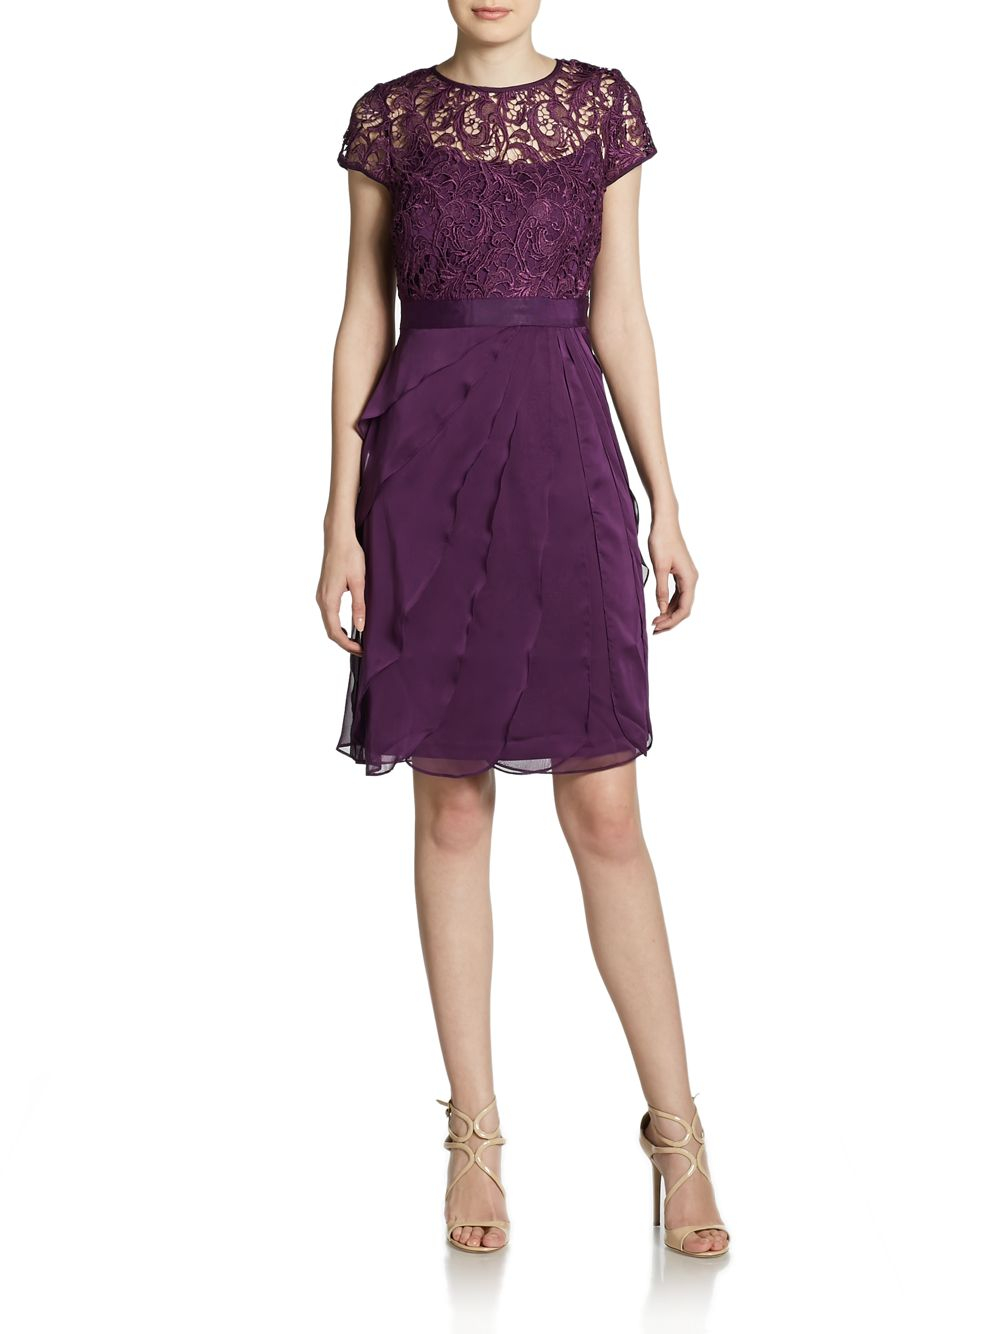 Adrianna Papell Lace Shortsleeve Flutter Dress in Purple (eggplant) | Lyst